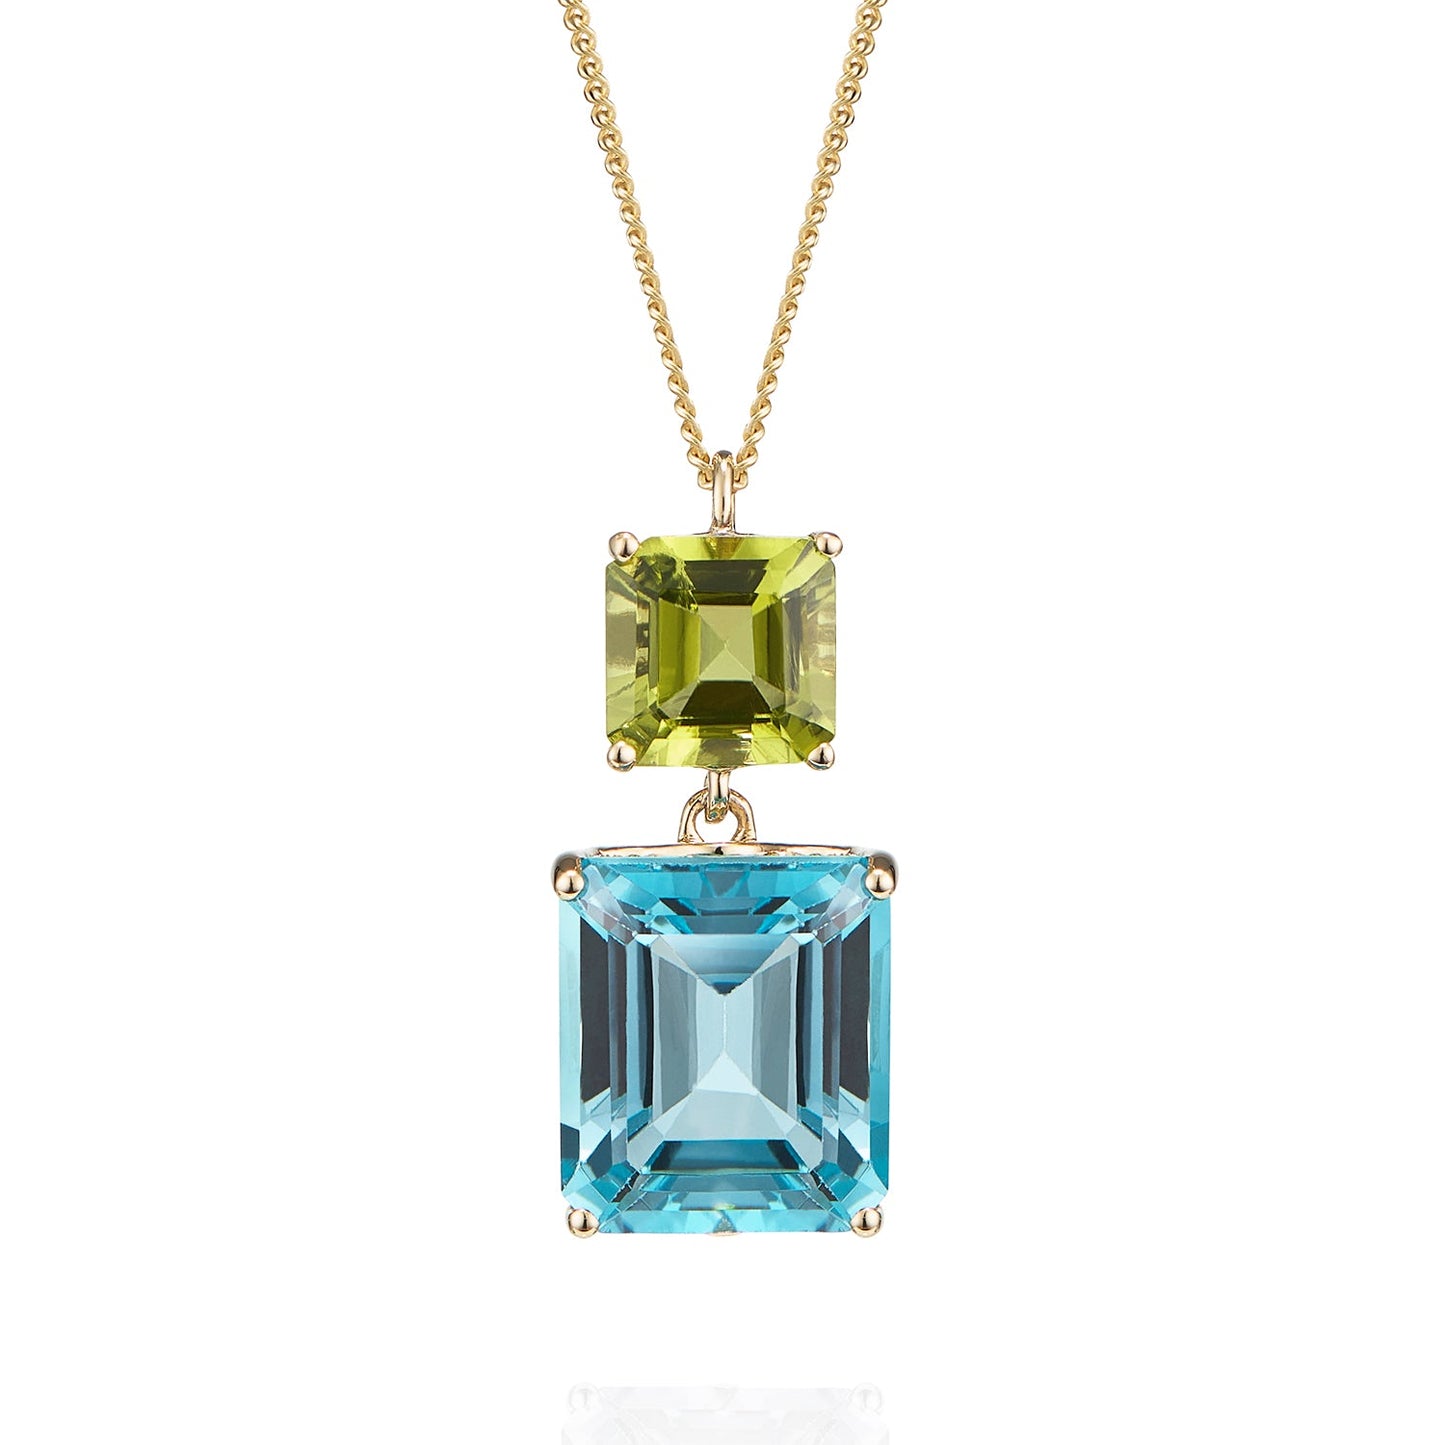 London-made luxury custom gold gemstone jewellery -9ct Yellow Gold Octagon Pendent Necklace in Peridot and Blue Topaz – Andalusian Collection, Augustine Jewellery, British Jewellers, Gemstone Jewellery, Luxury Jewellery London.